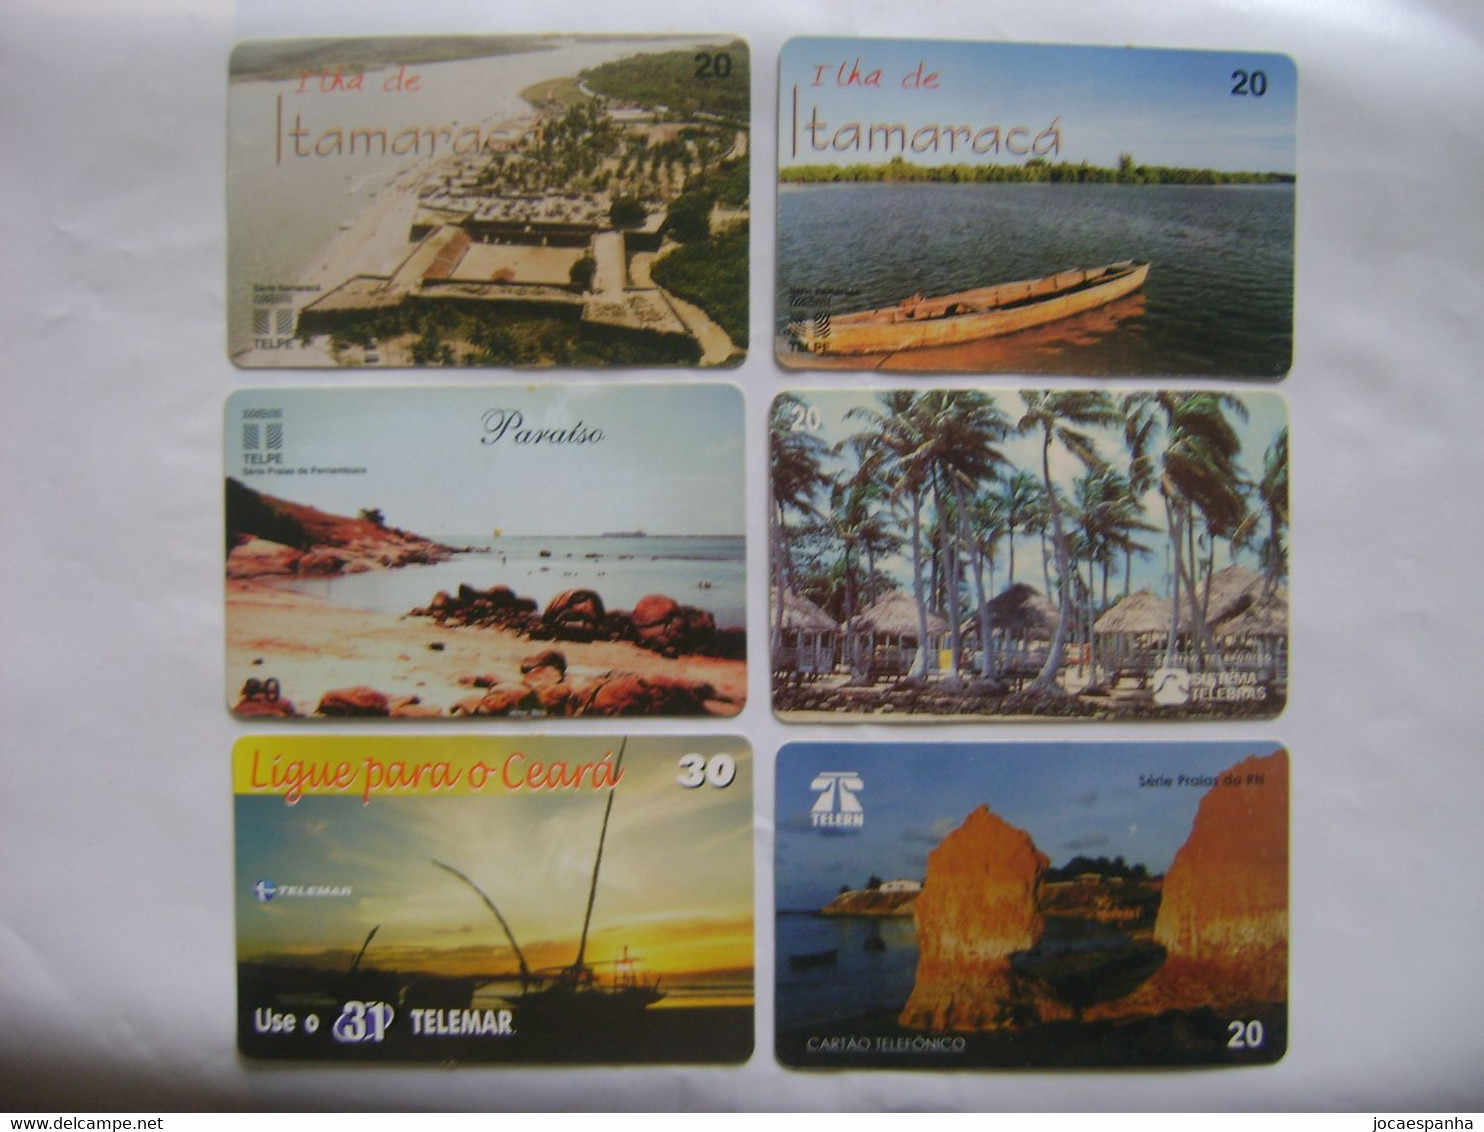 BRAZIL / BRASIL - 10 PHONE CARDS BEACHES, VARIOUS OPERATORS - 1996 TO 2001 - Paysages